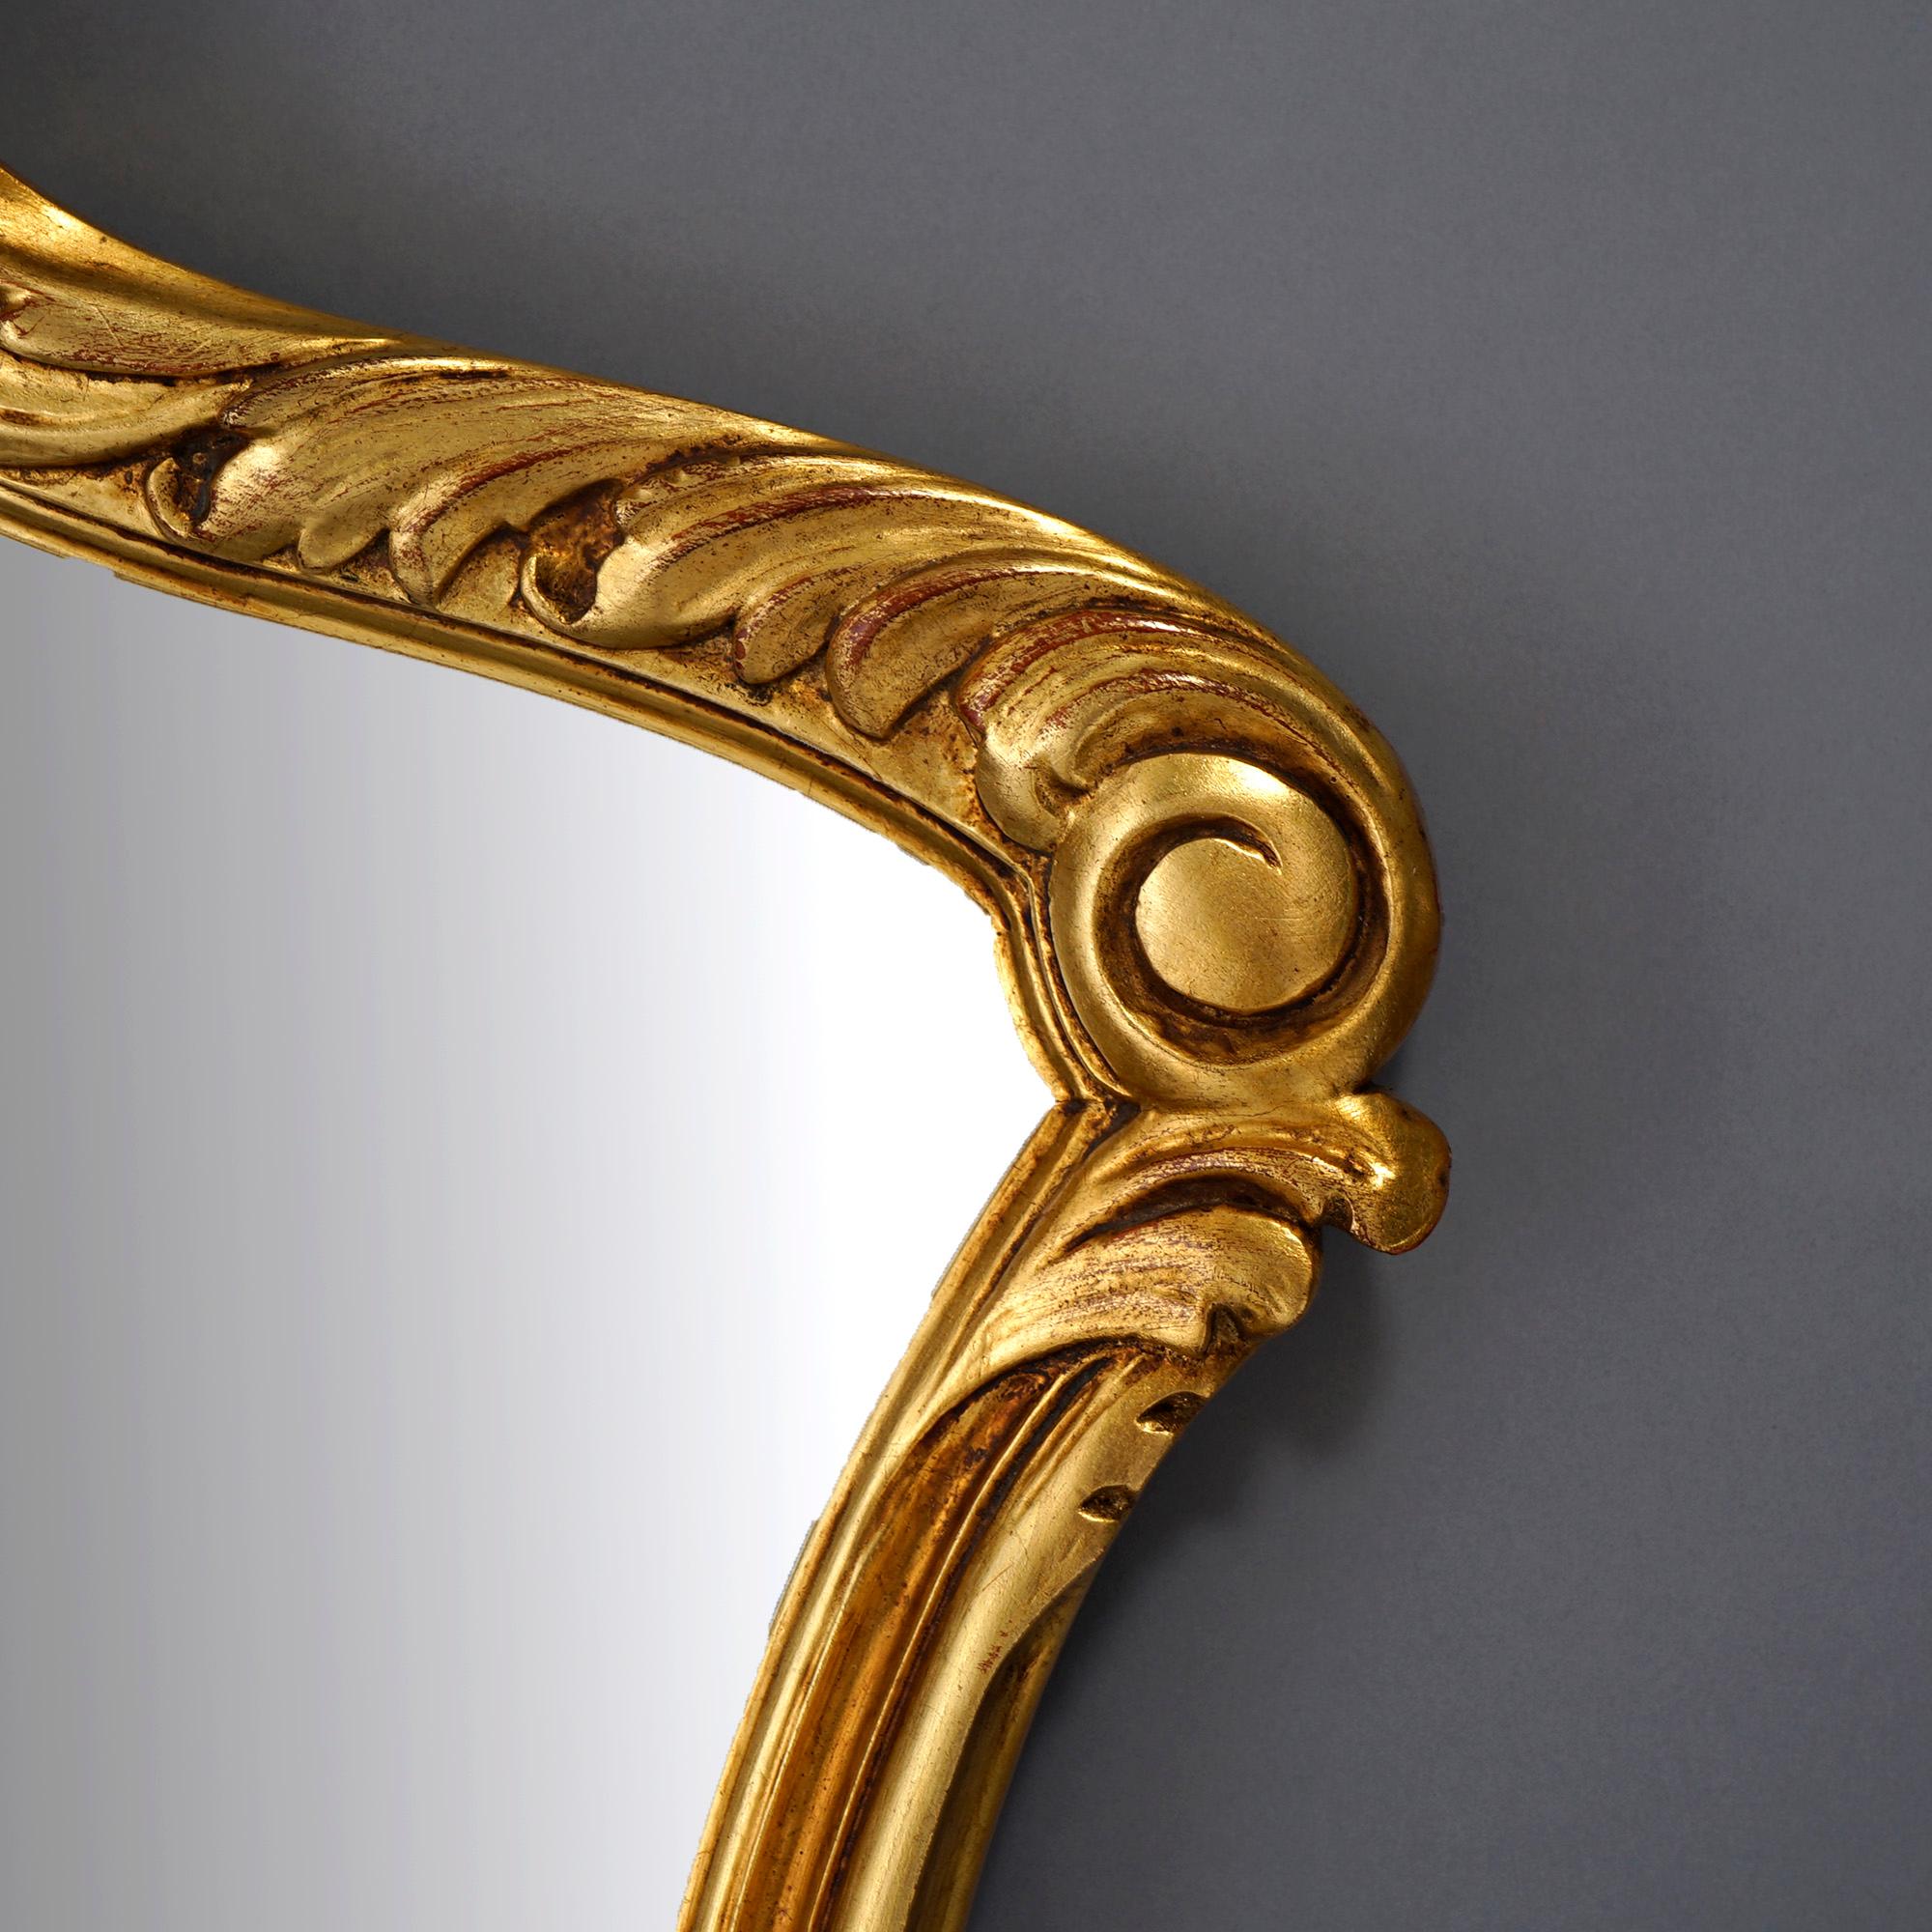 20th Century French Rococo Style Giltwood Wall Mirror, 20th C